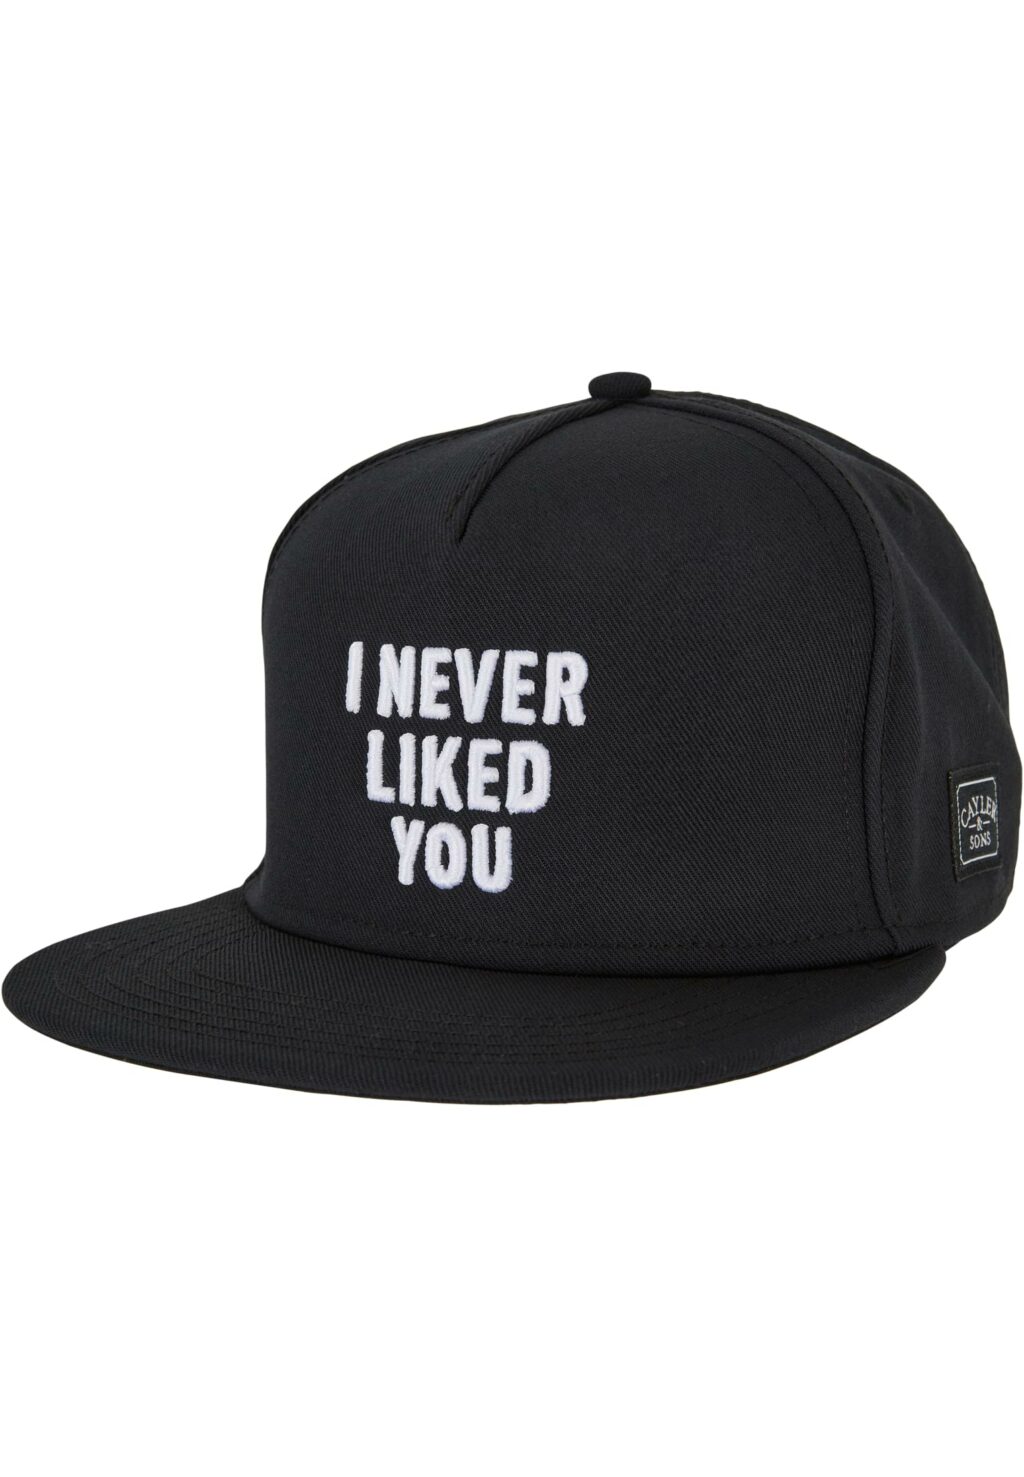 Never Liked You P Cap black one CS3097